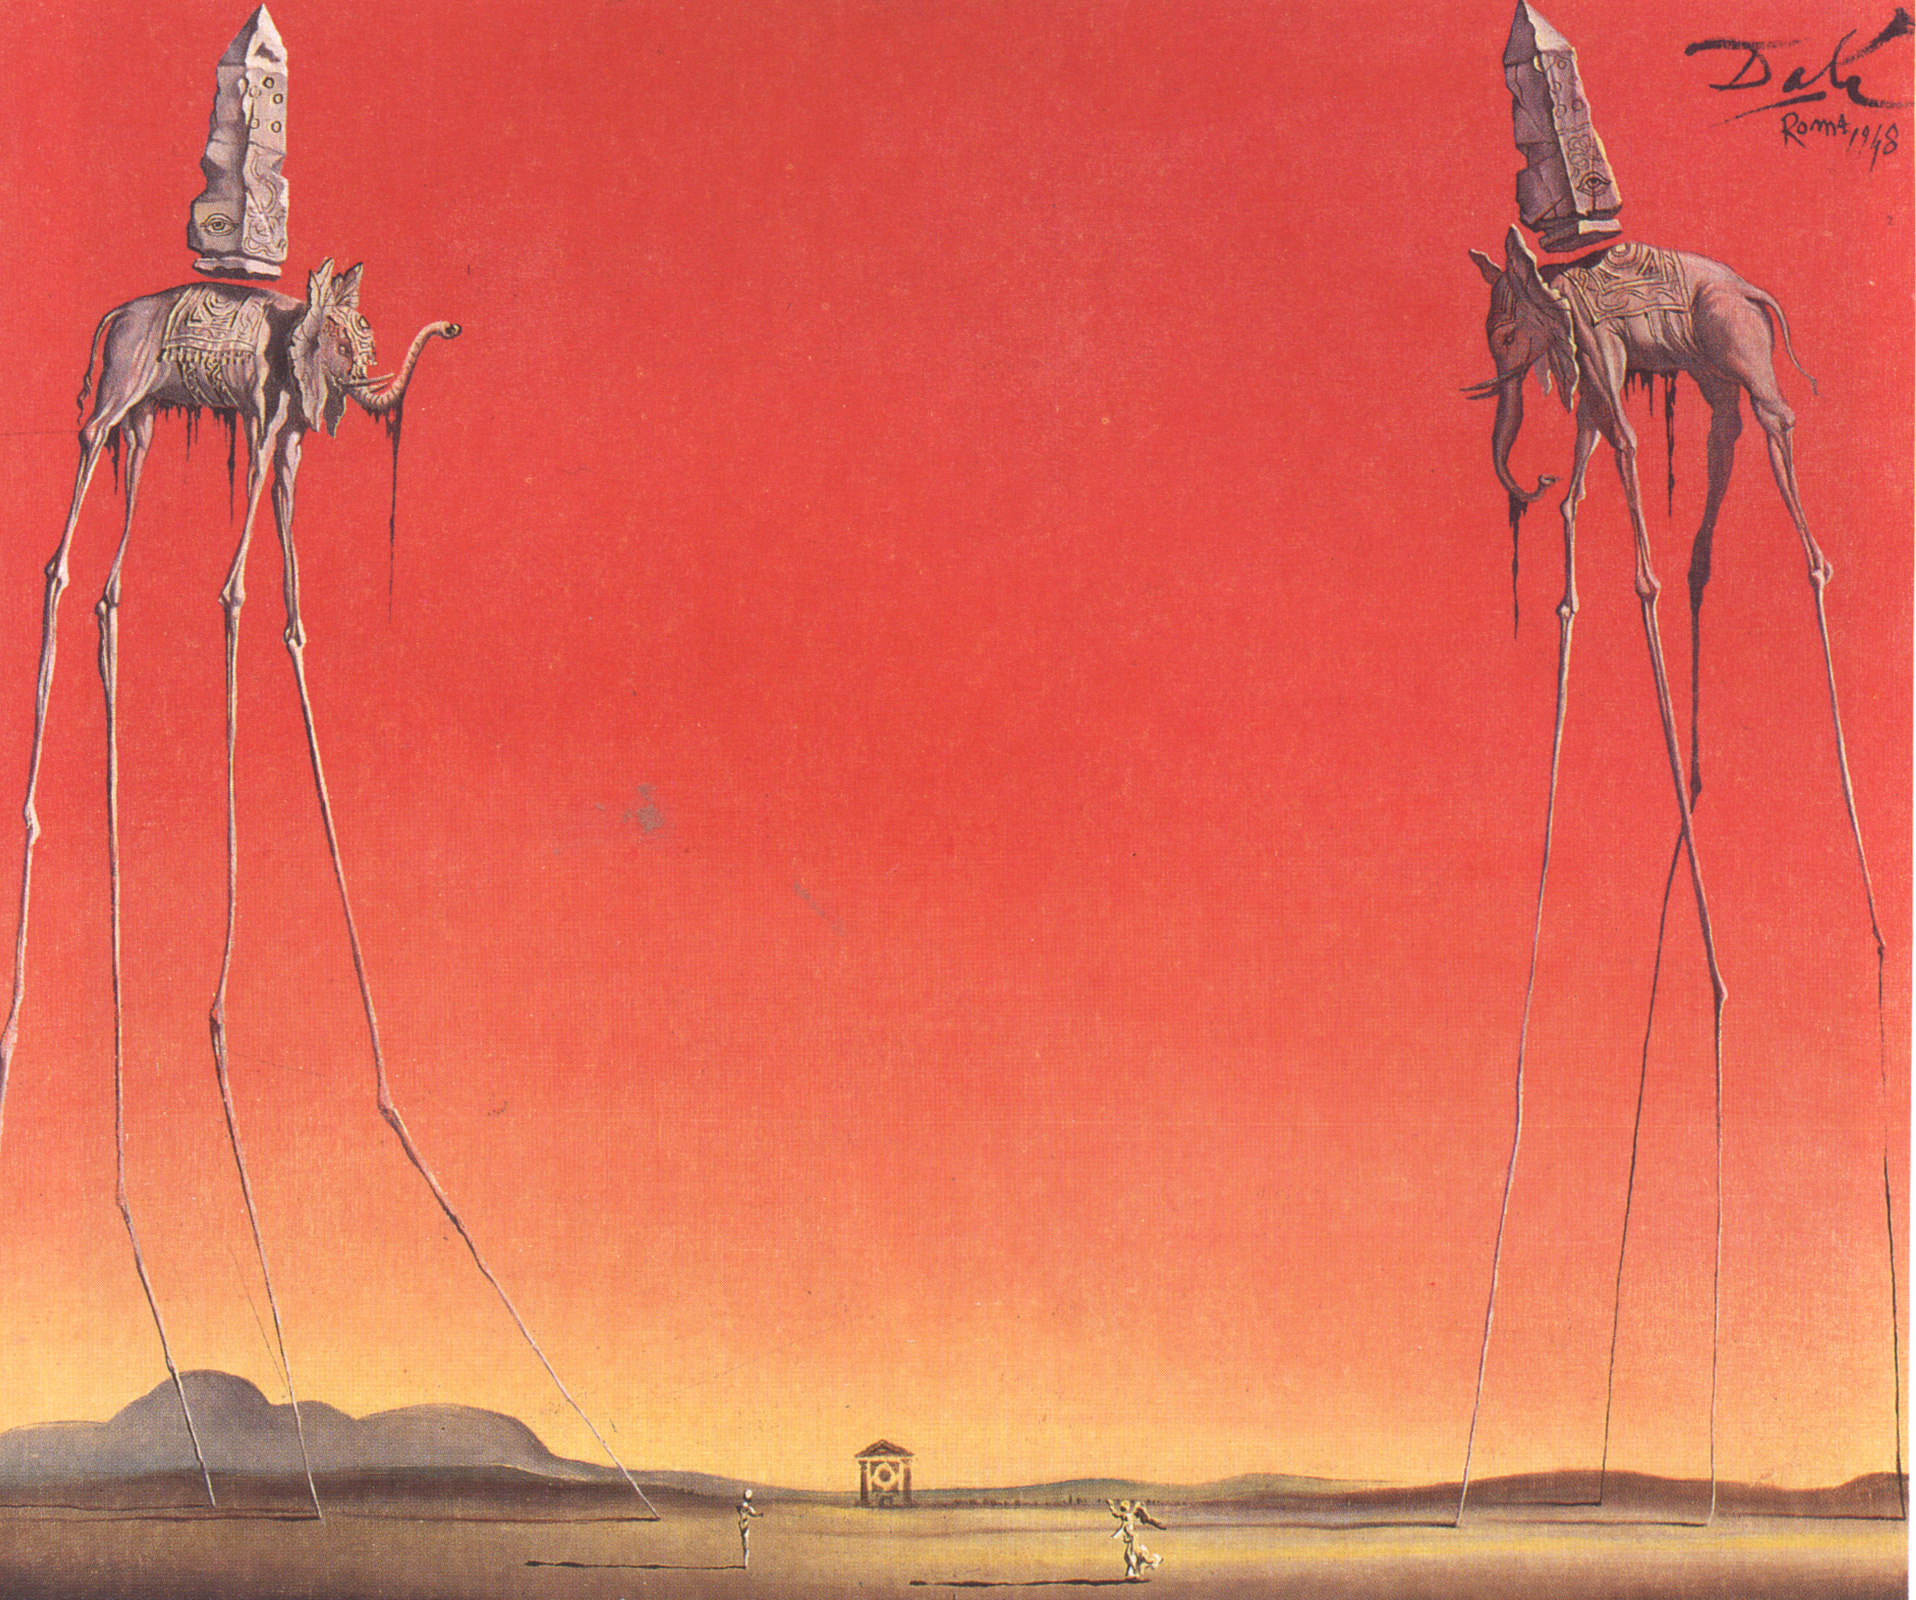 The Elephants by Salvador Dalí - 1948 - - private collection